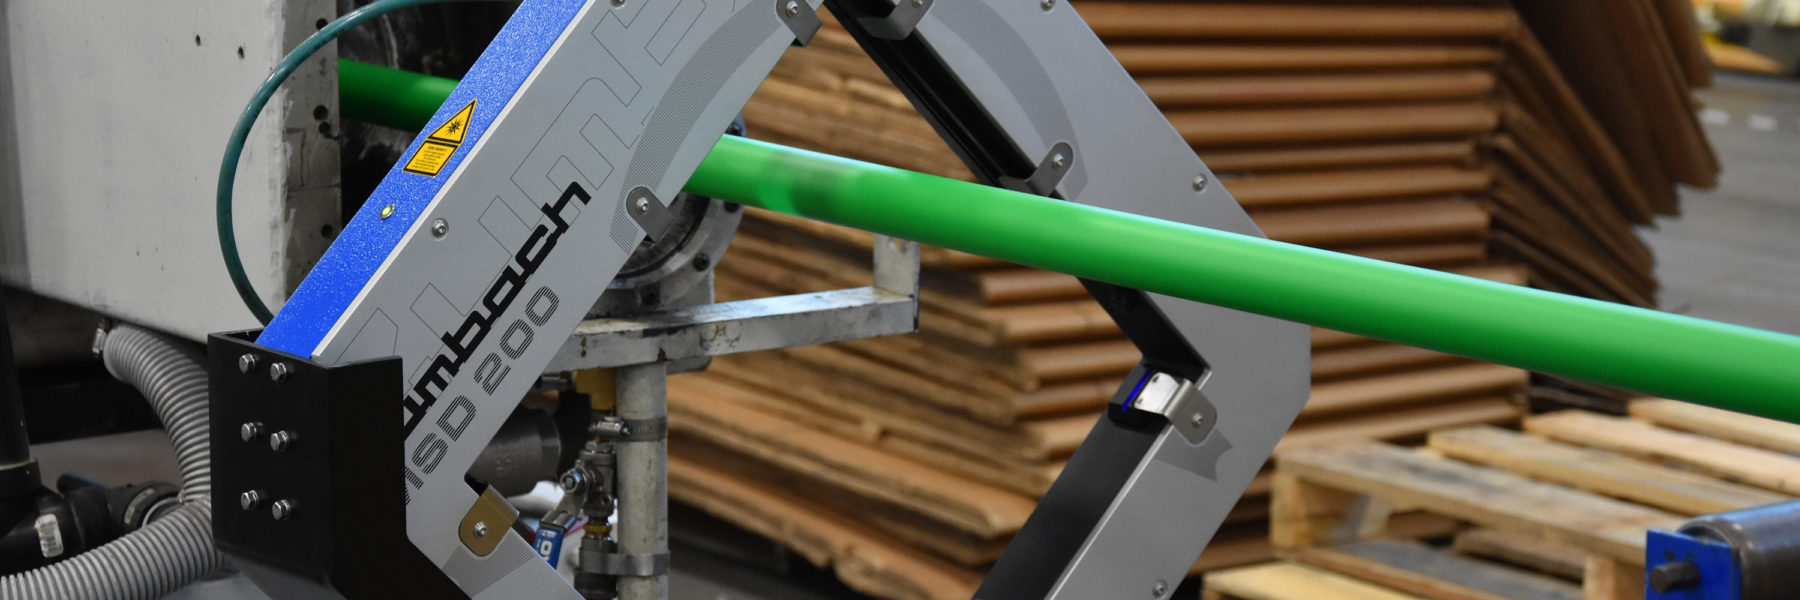 Green conduit running on extrusion line through Zumbach measurement device.